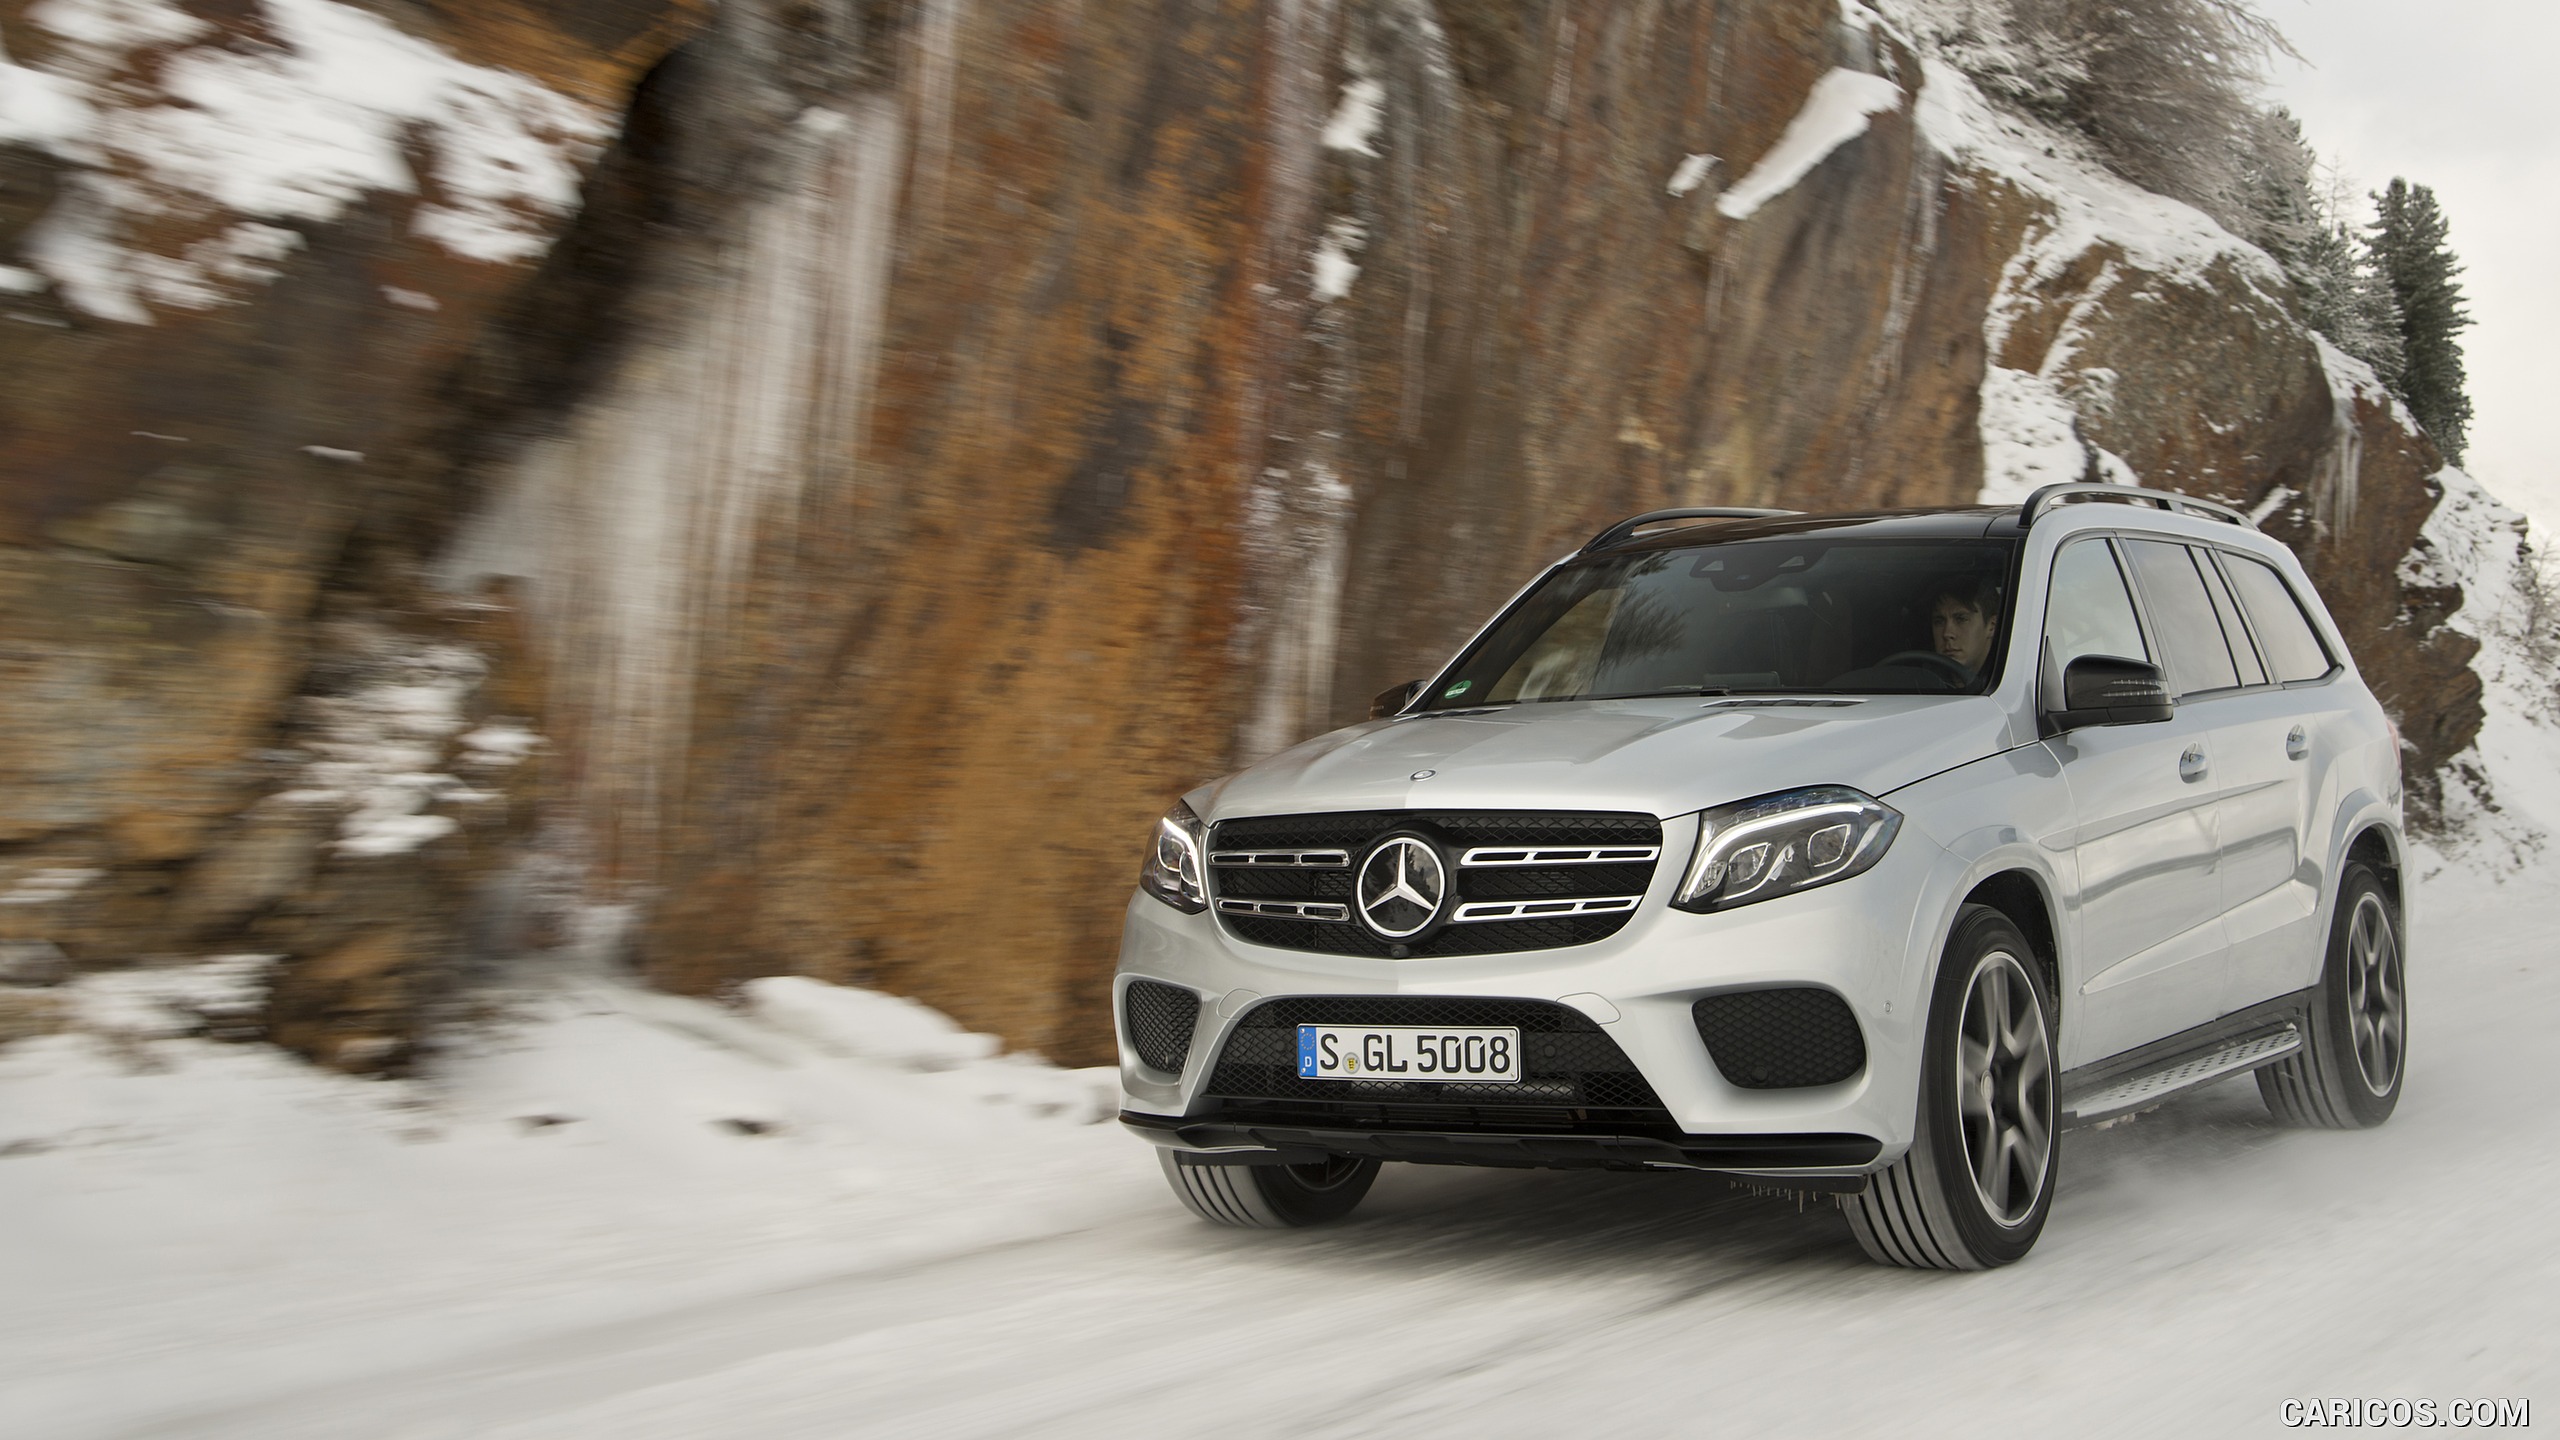 2017 Mercedes-Benz GLS 500 4MATIC AMG Line in Snow - Front, #123 of 255